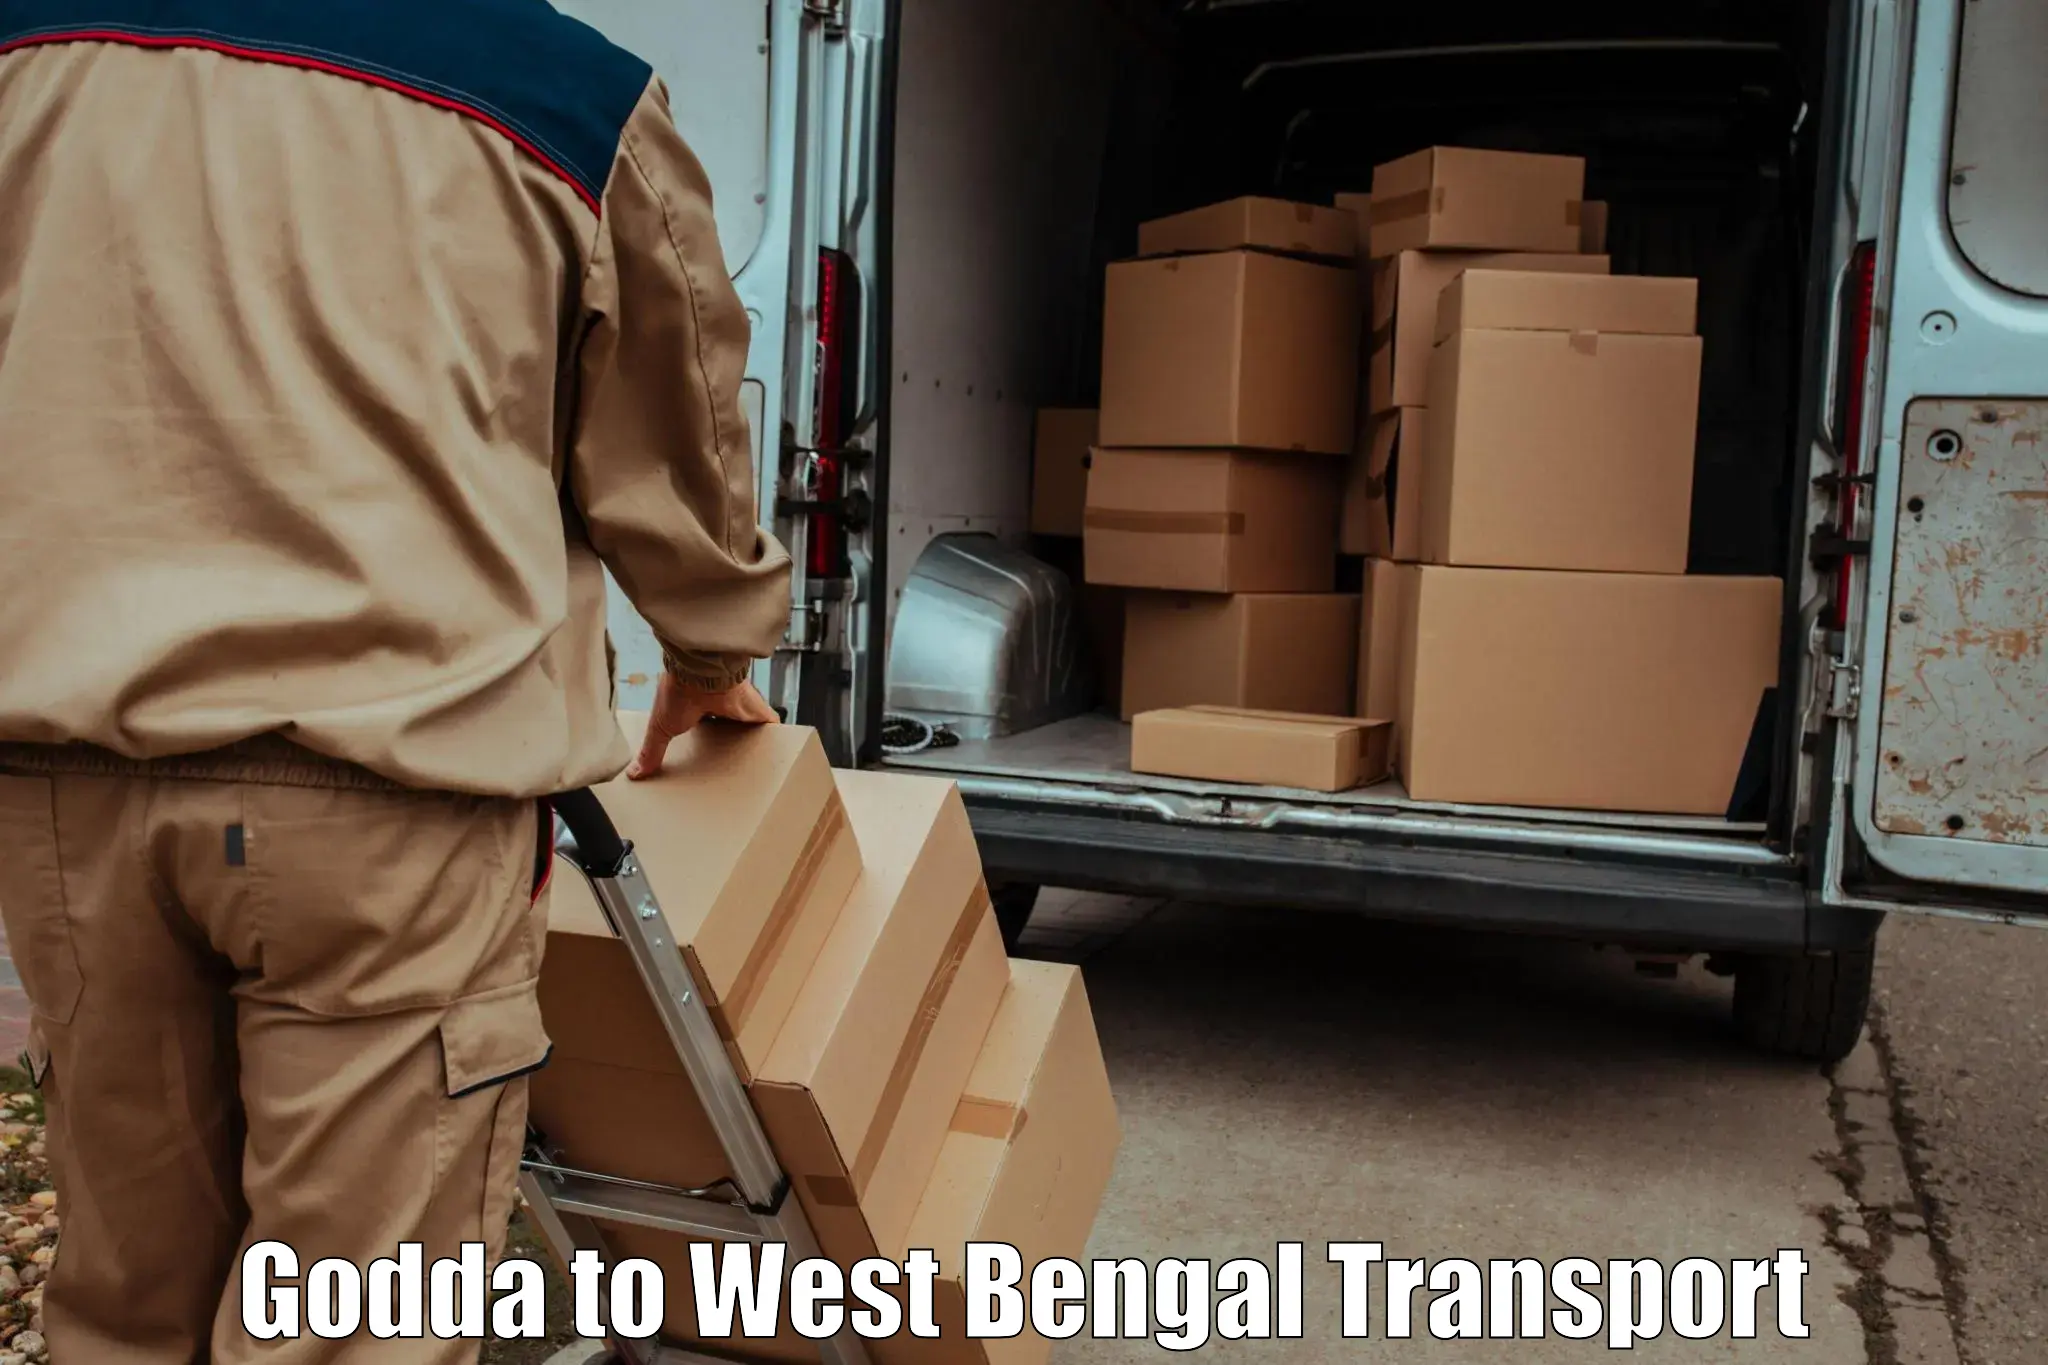 Nearby transport service Godda to Midnapore